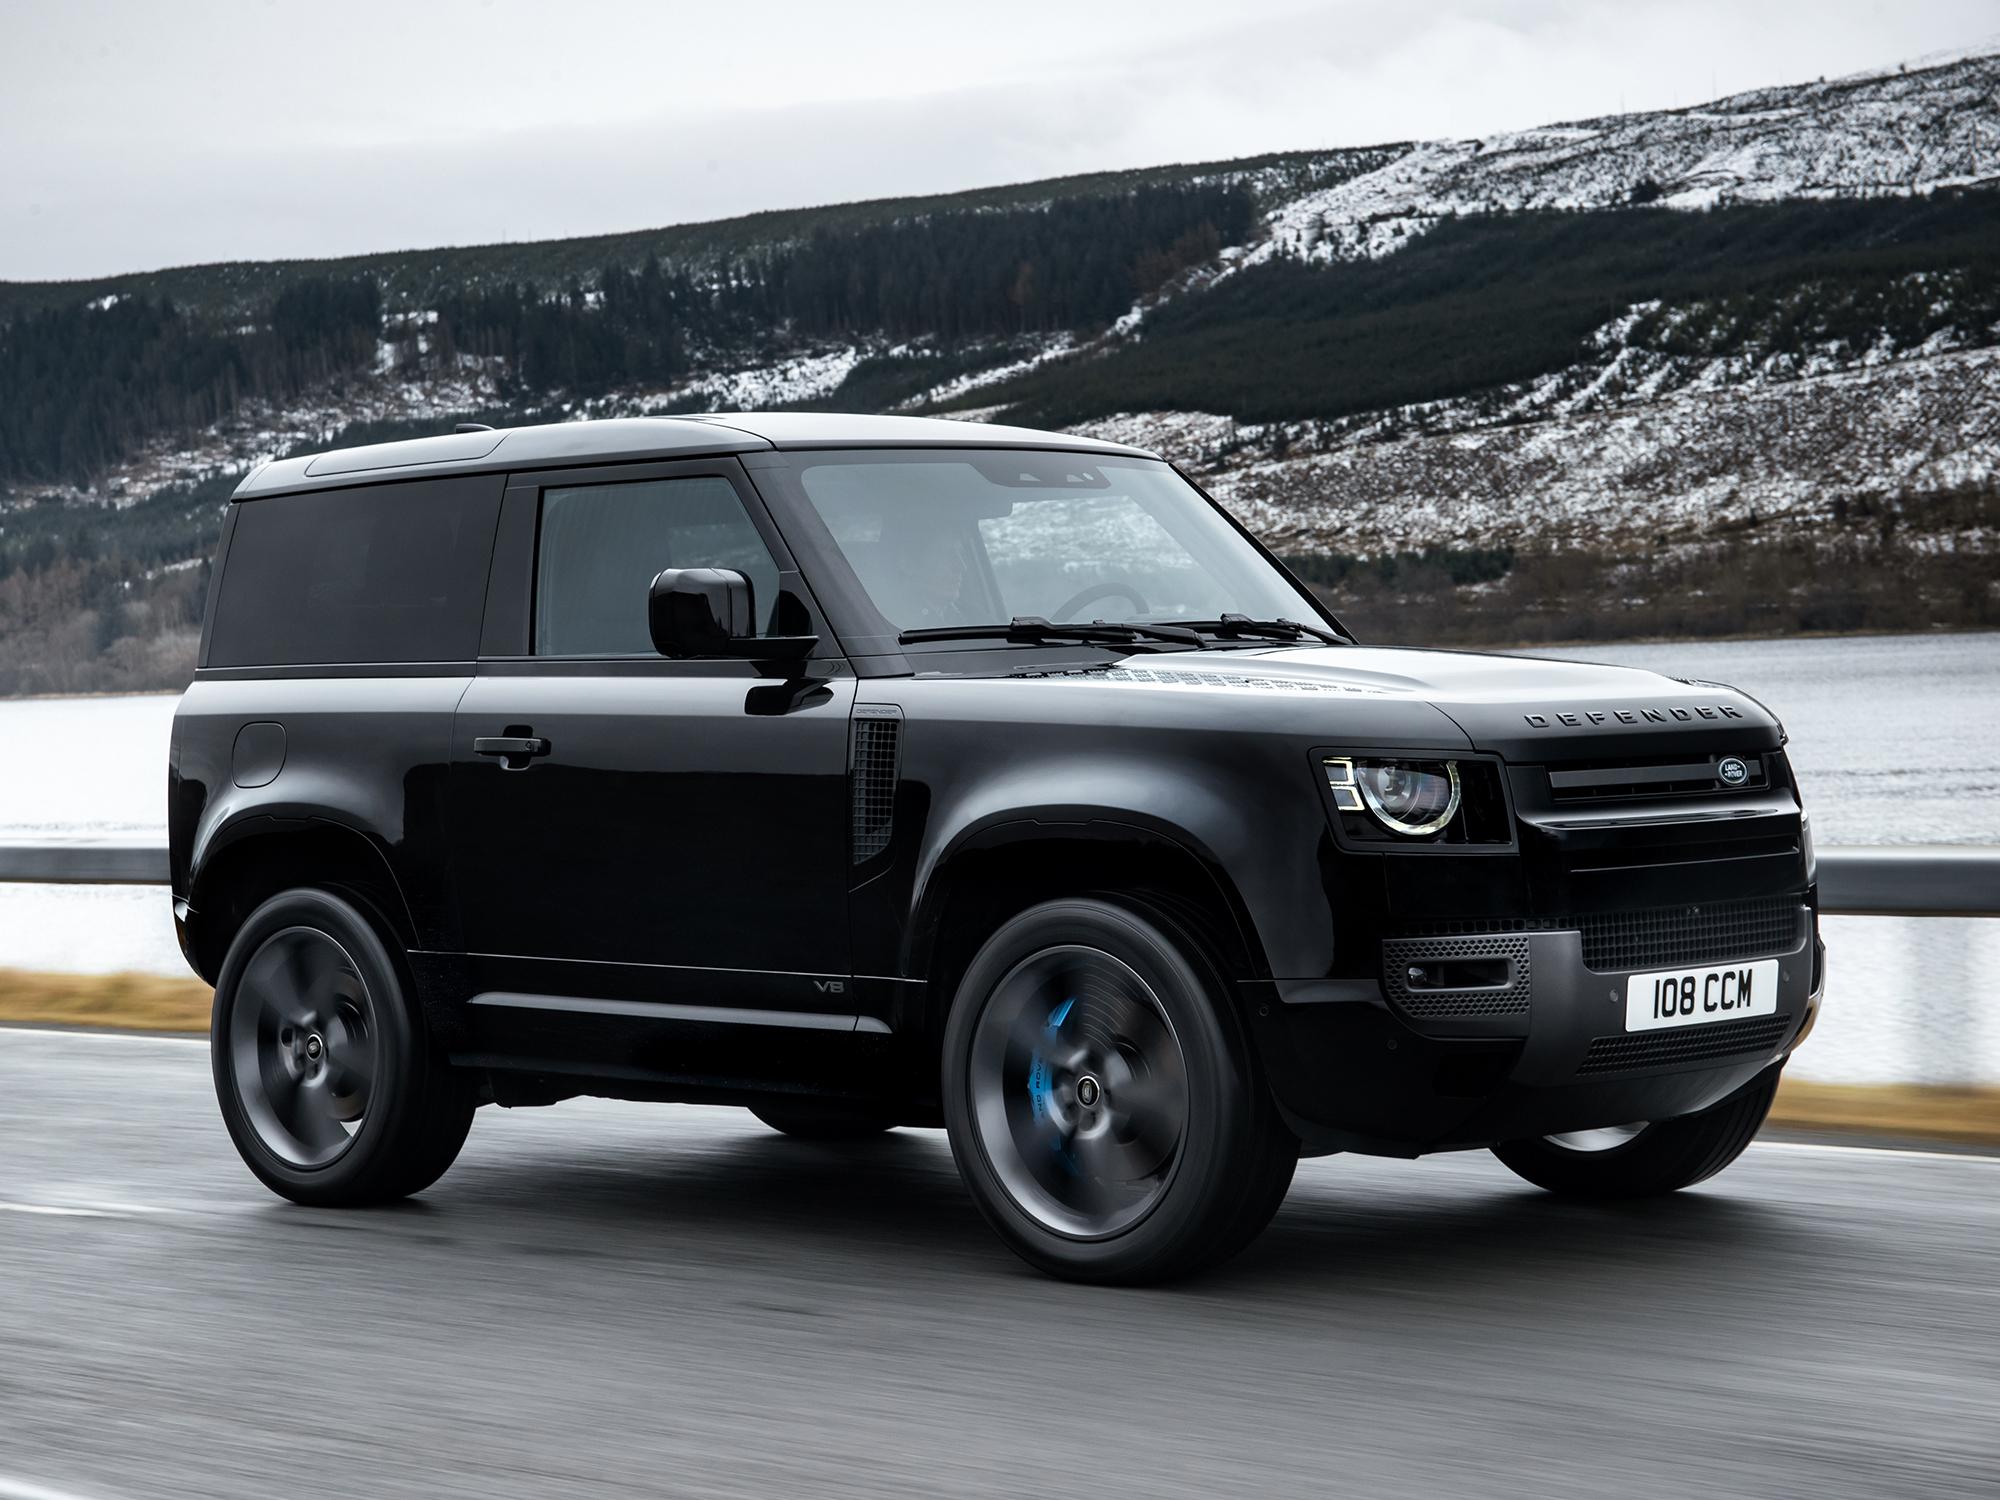 2022 Land Rover Defender Buyers Guide - Drive